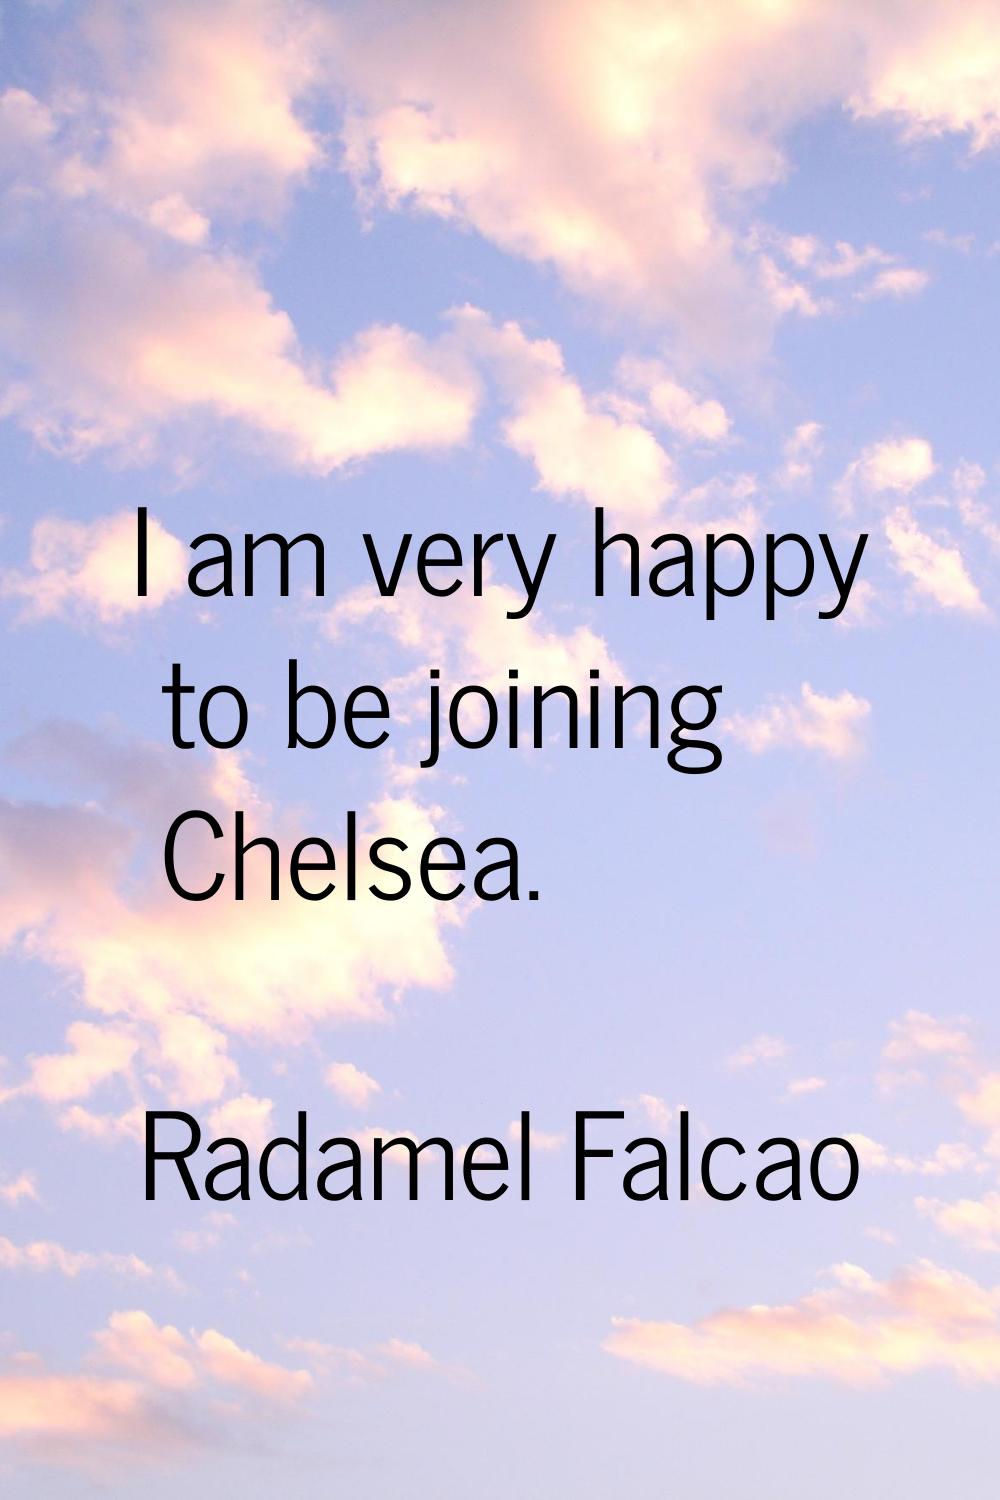 I am very happy to be joining Chelsea.